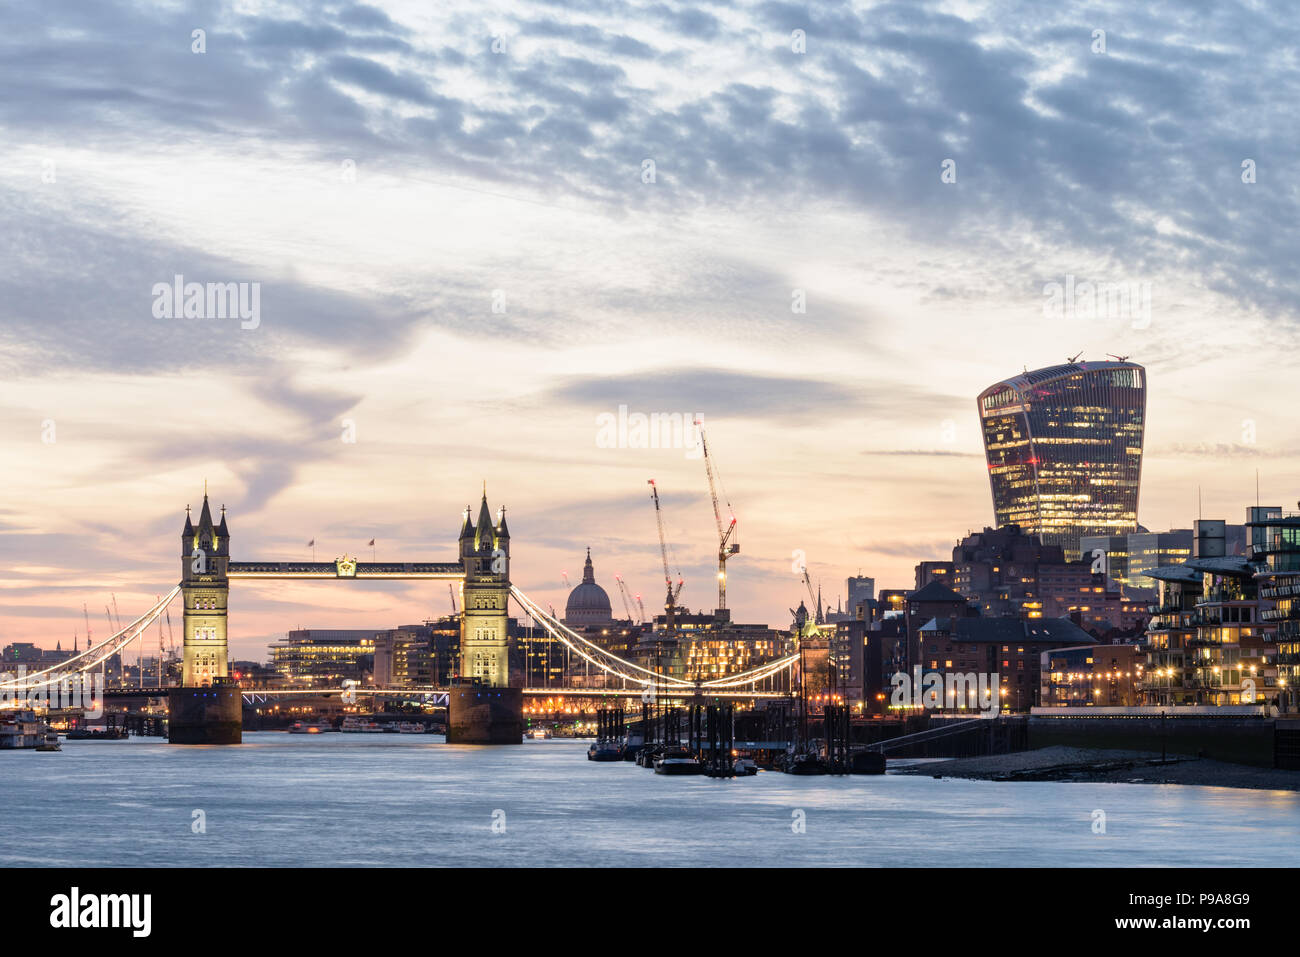 View from the Thames at Bermondsey, London, of Tower Bridge, the Walkie Talkie and other riverside buildings illuminated at sunset with an orange sky Stock Photo